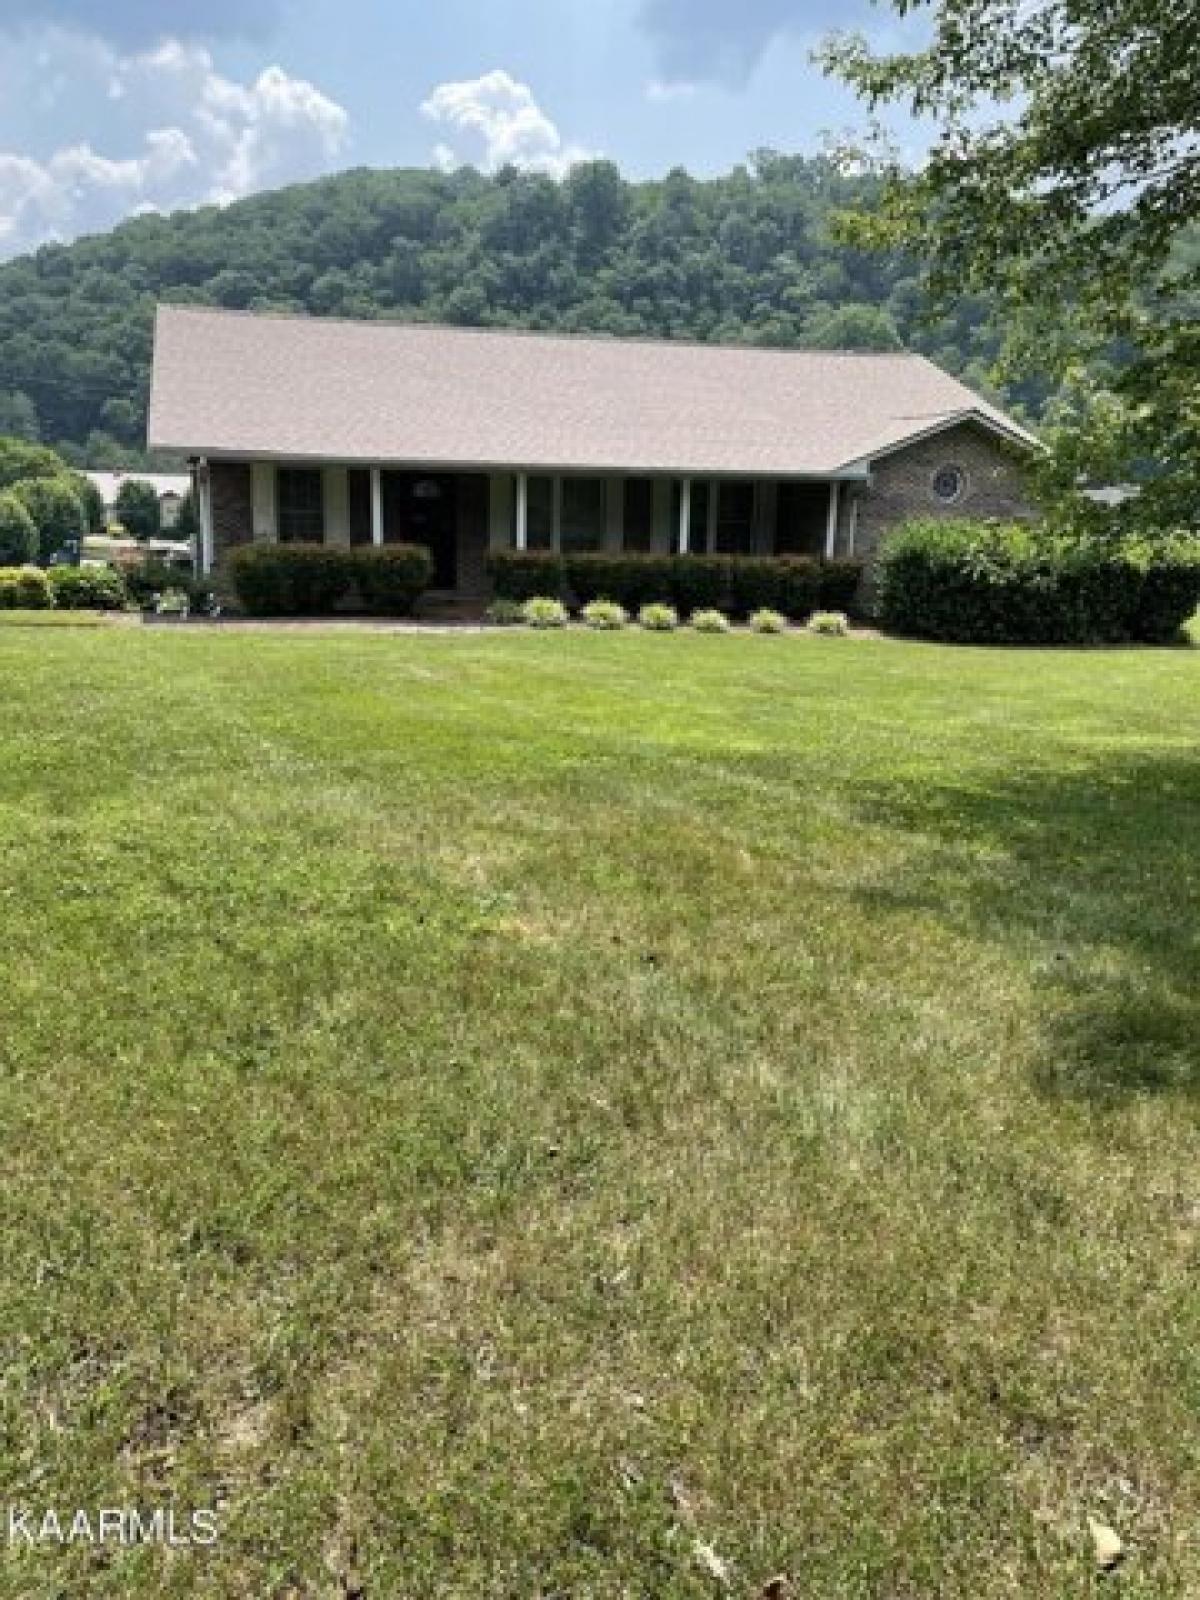 Picture of Home For Sale in Clinton, Tennessee, United States